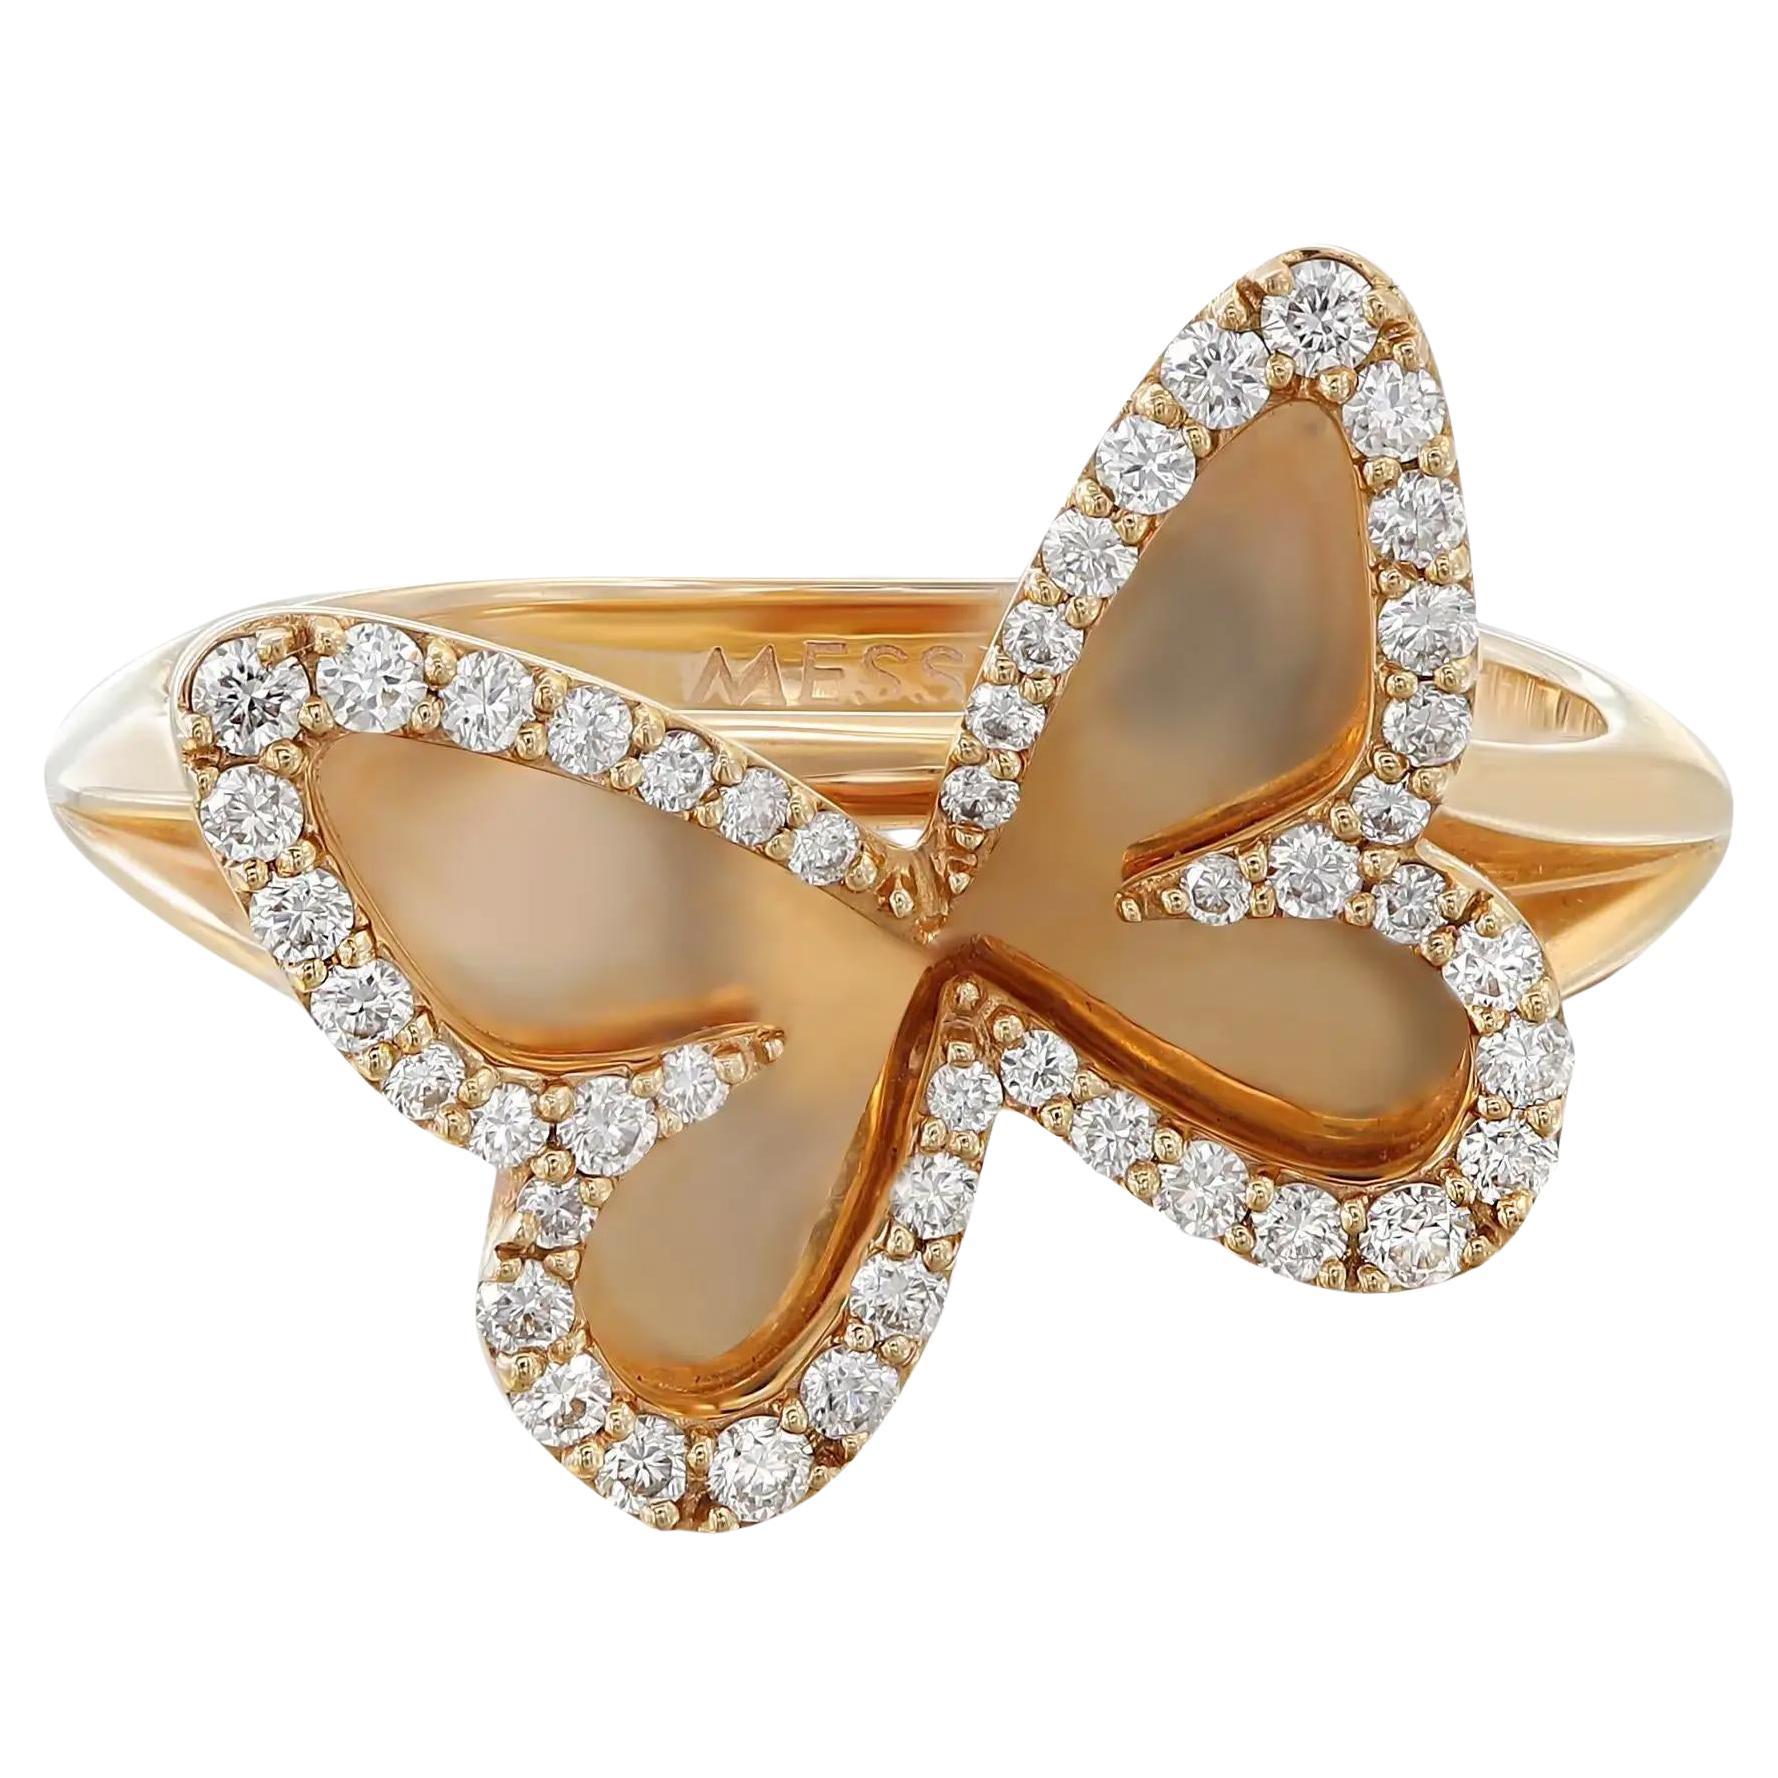 Messika 0.27Cttw Plaque Butterfly Diamond Ring 18K Rose Gold Size 54 US 6.75